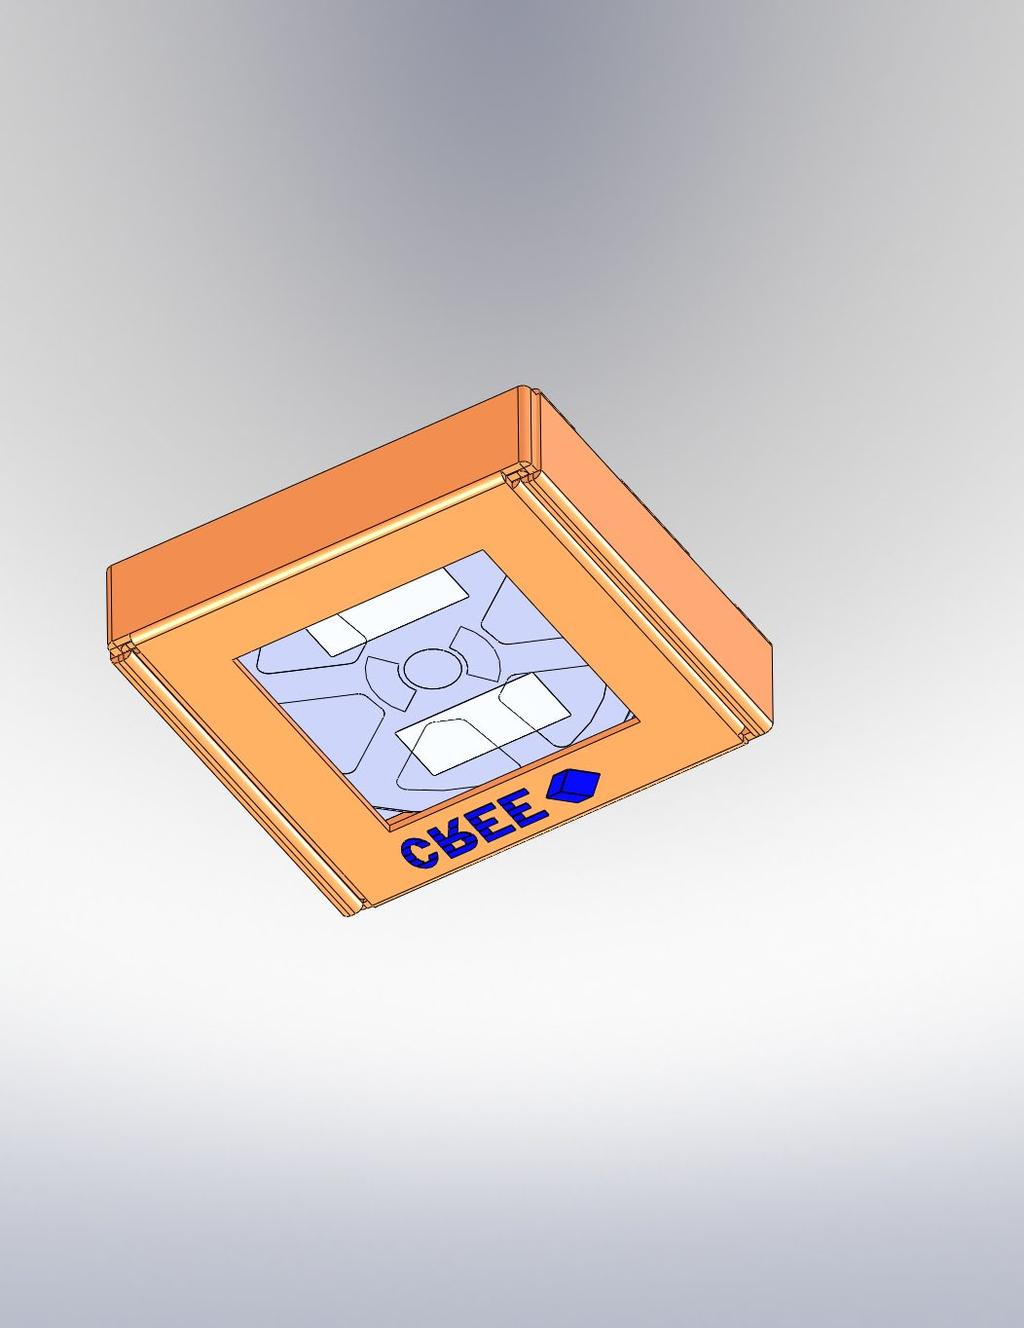 Quantity, Reel ID, PO # Label with Cree Bin Code, Quantity, Reel ID Patent Label (on bottom of box) Copyright 200207 Cree, Inc. All rights reserved.